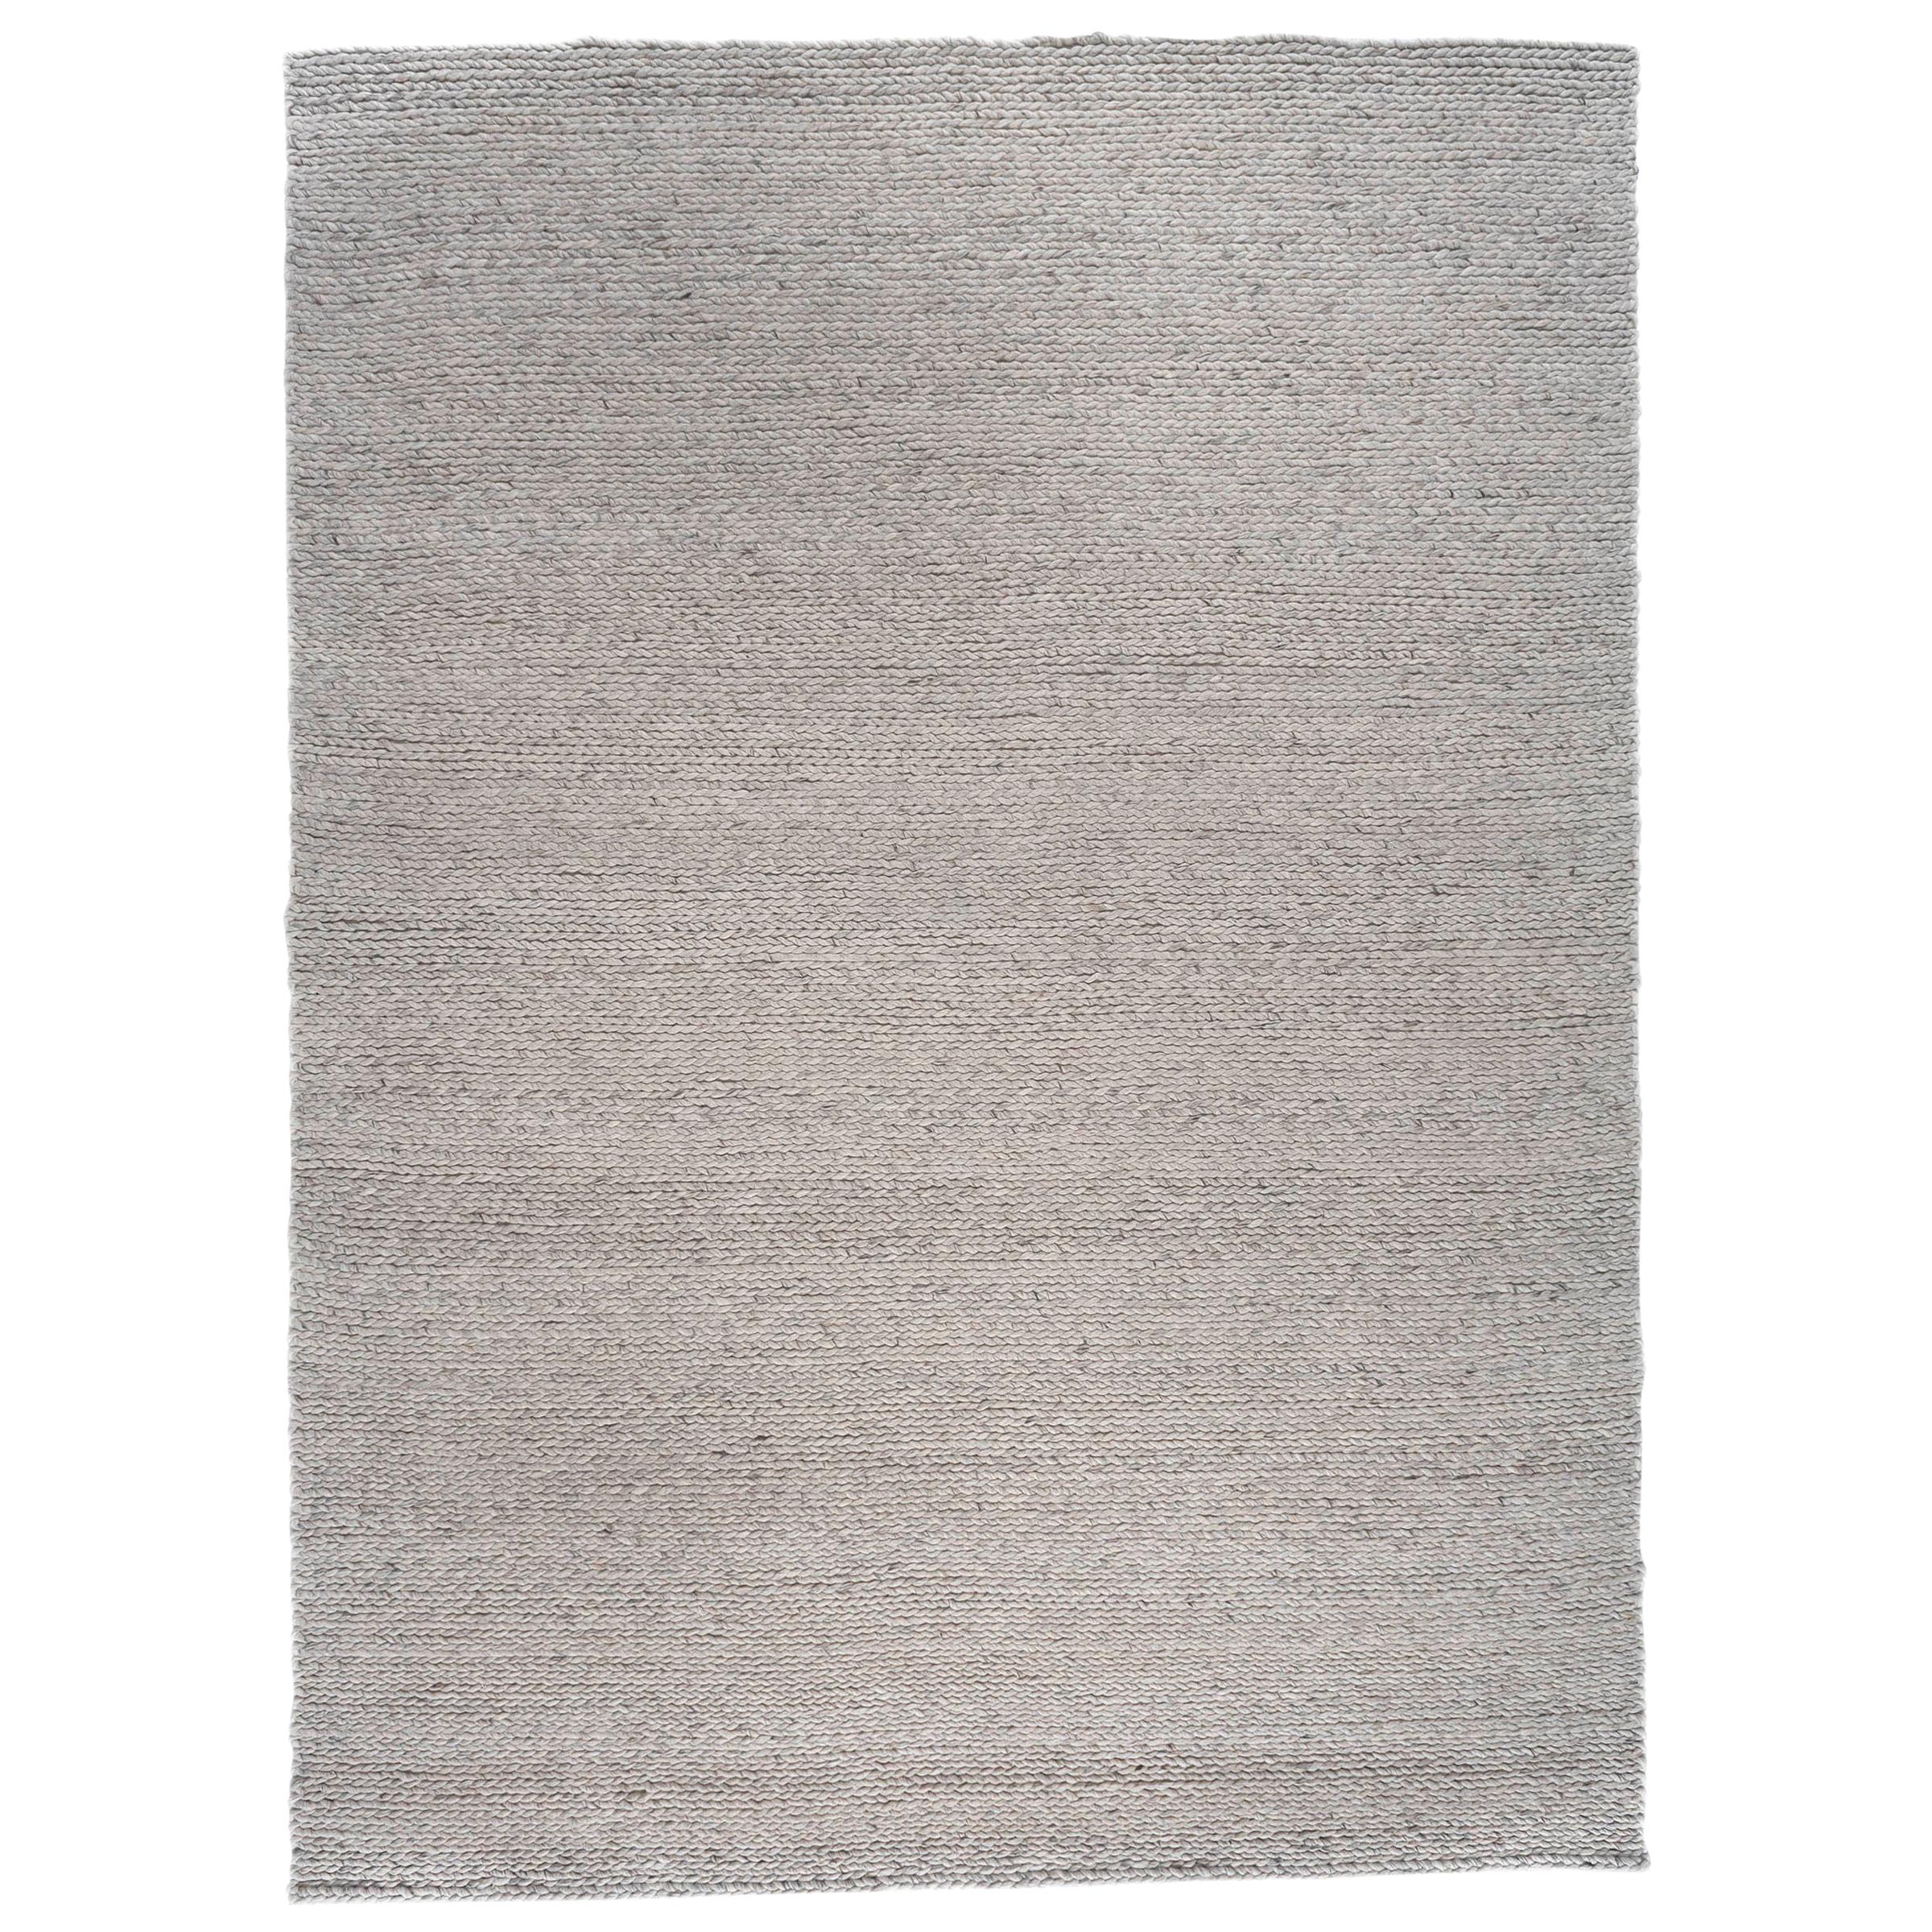 Oatmeal Braided Wool Area Rug For Sale